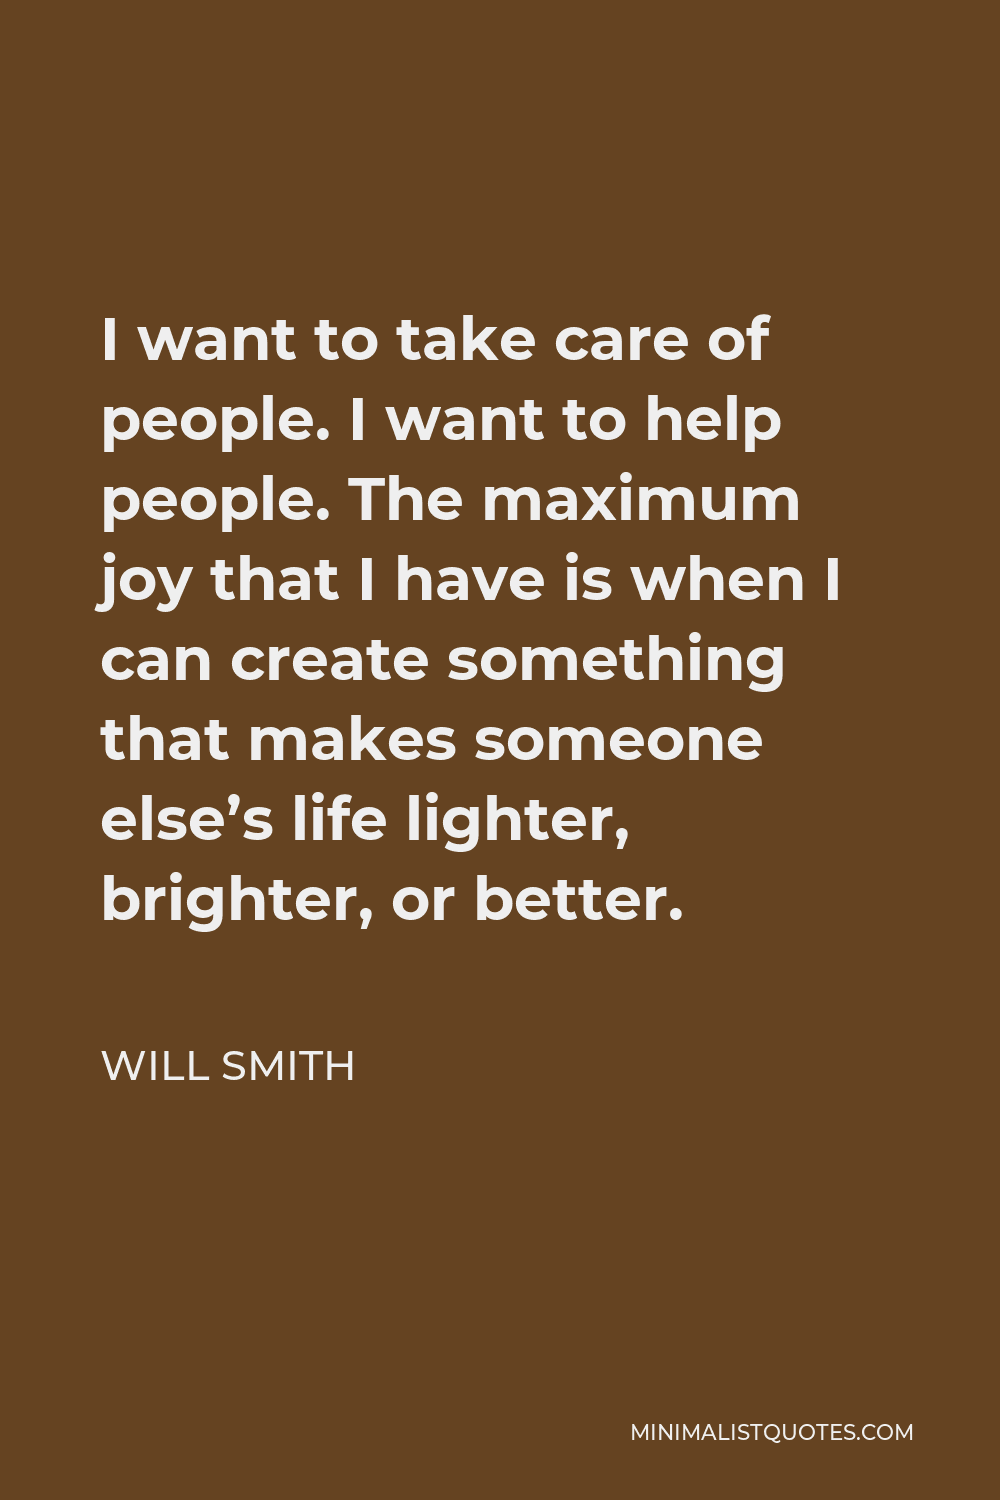 Will Smith Quote - I want to take care of people. I want to help people. The maximum joy that I have is when I can create something that makes someone else’s life lighter, brighter, or better.